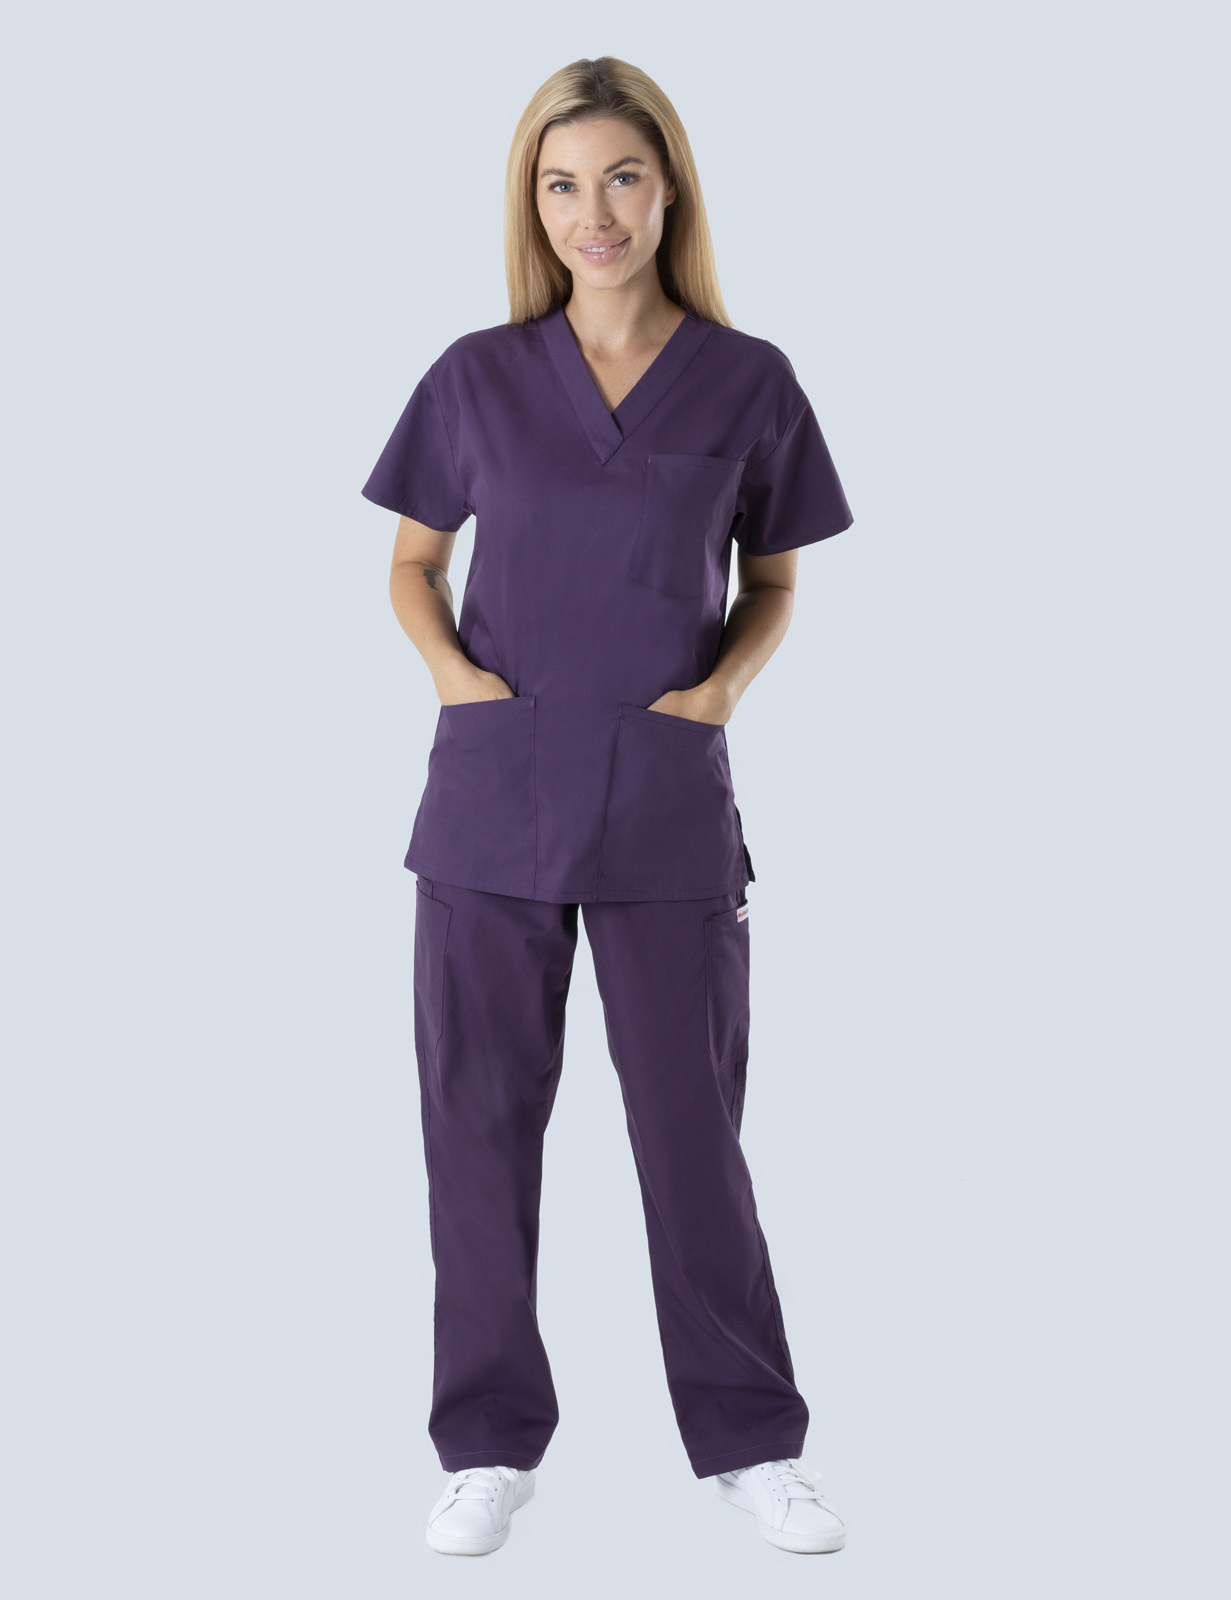 Children's Hospital Melbourne - ED (4 Pocket Scrub Top and Cargo Pants in Aubergine incl Logos)